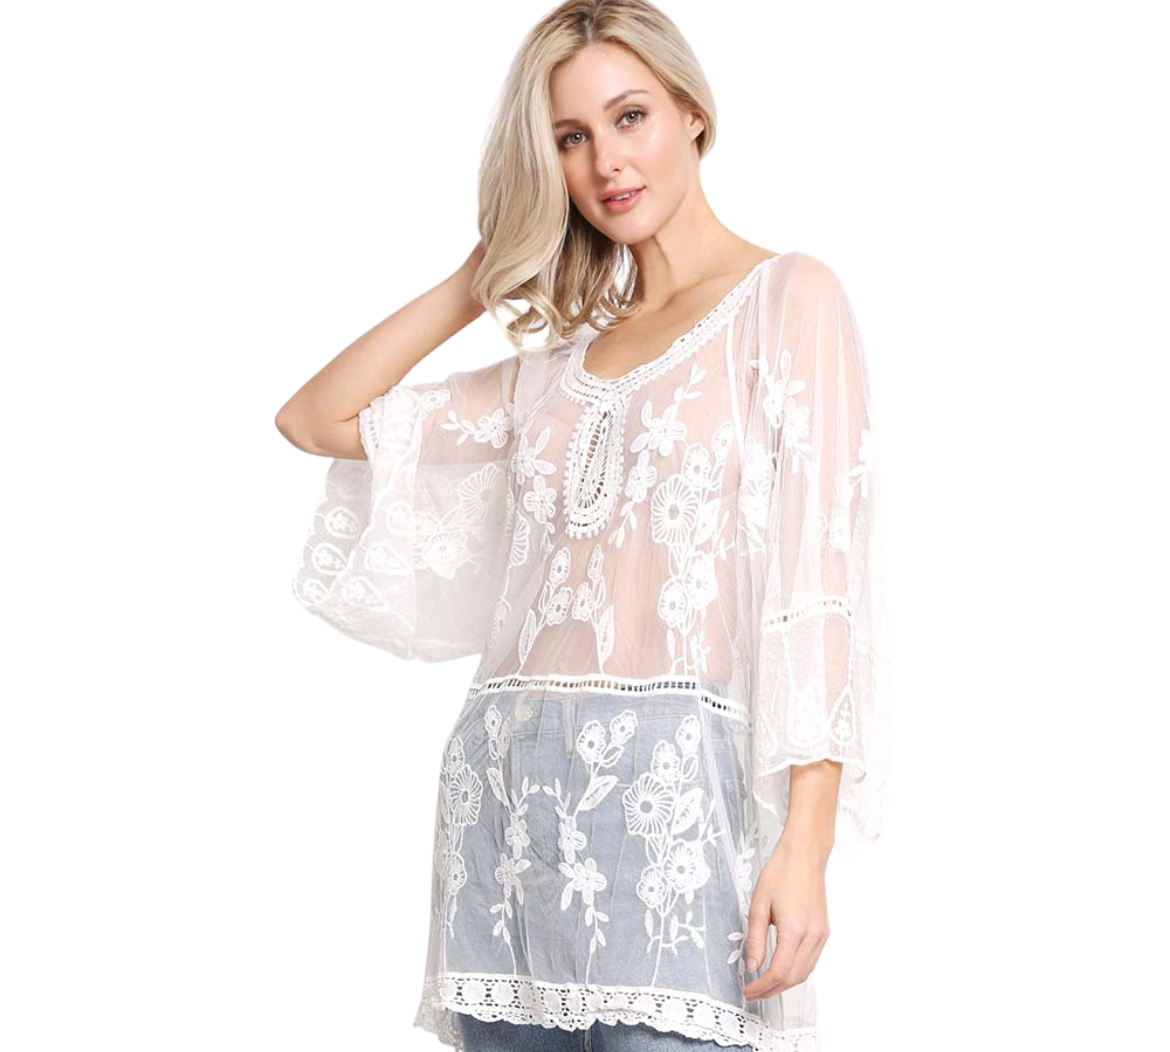 Flower Patterned Lace Cover Up